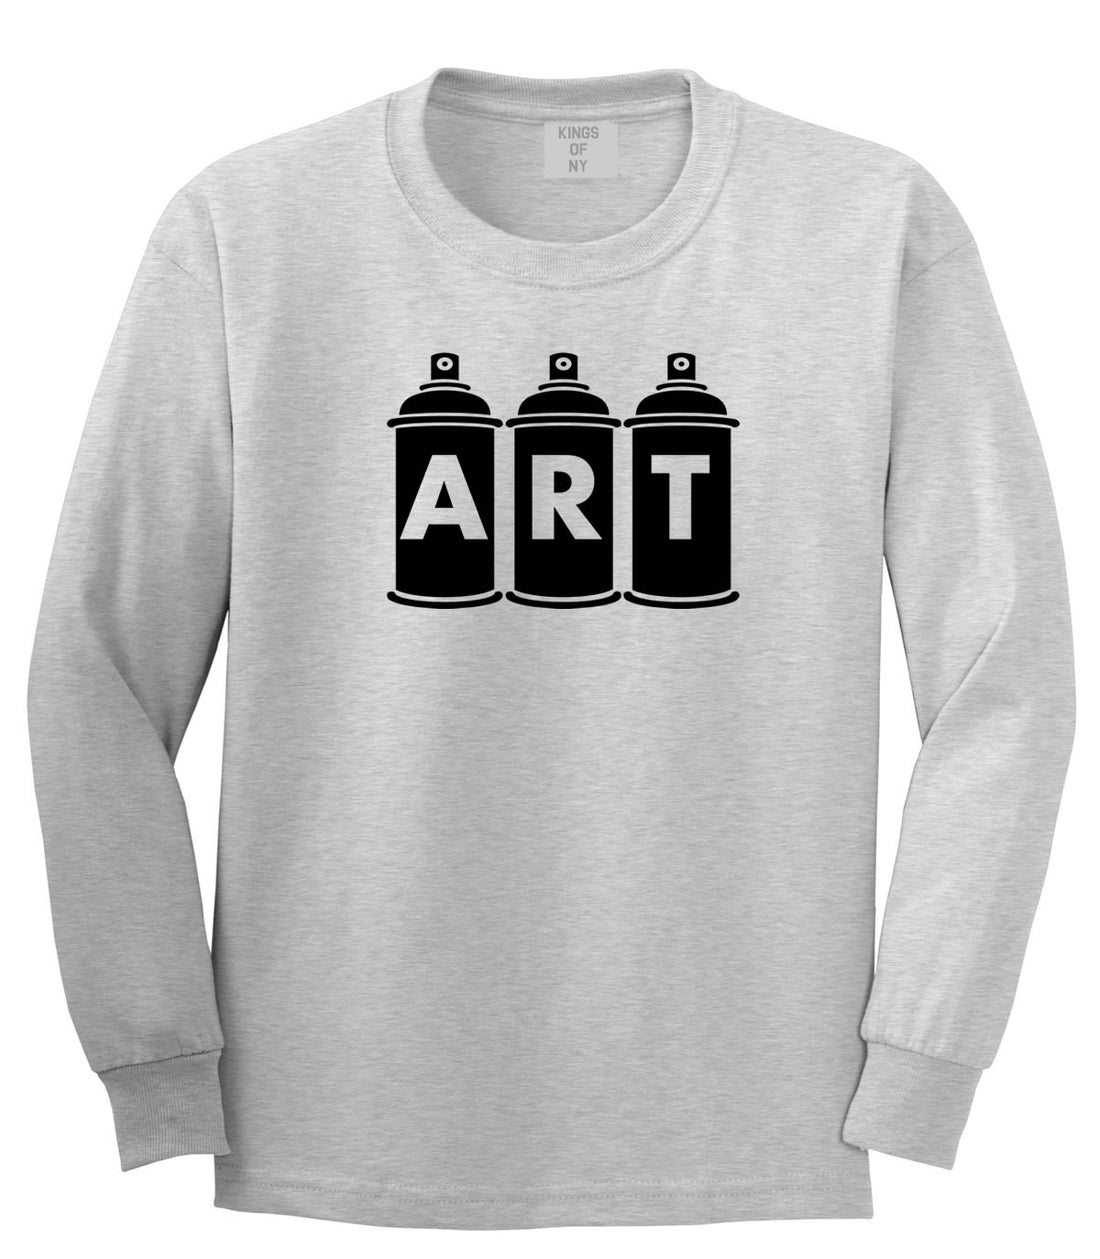 Art graf graffiti spray can paint artist Long Sleeve T-Shirt in Grey By Kings Of NY